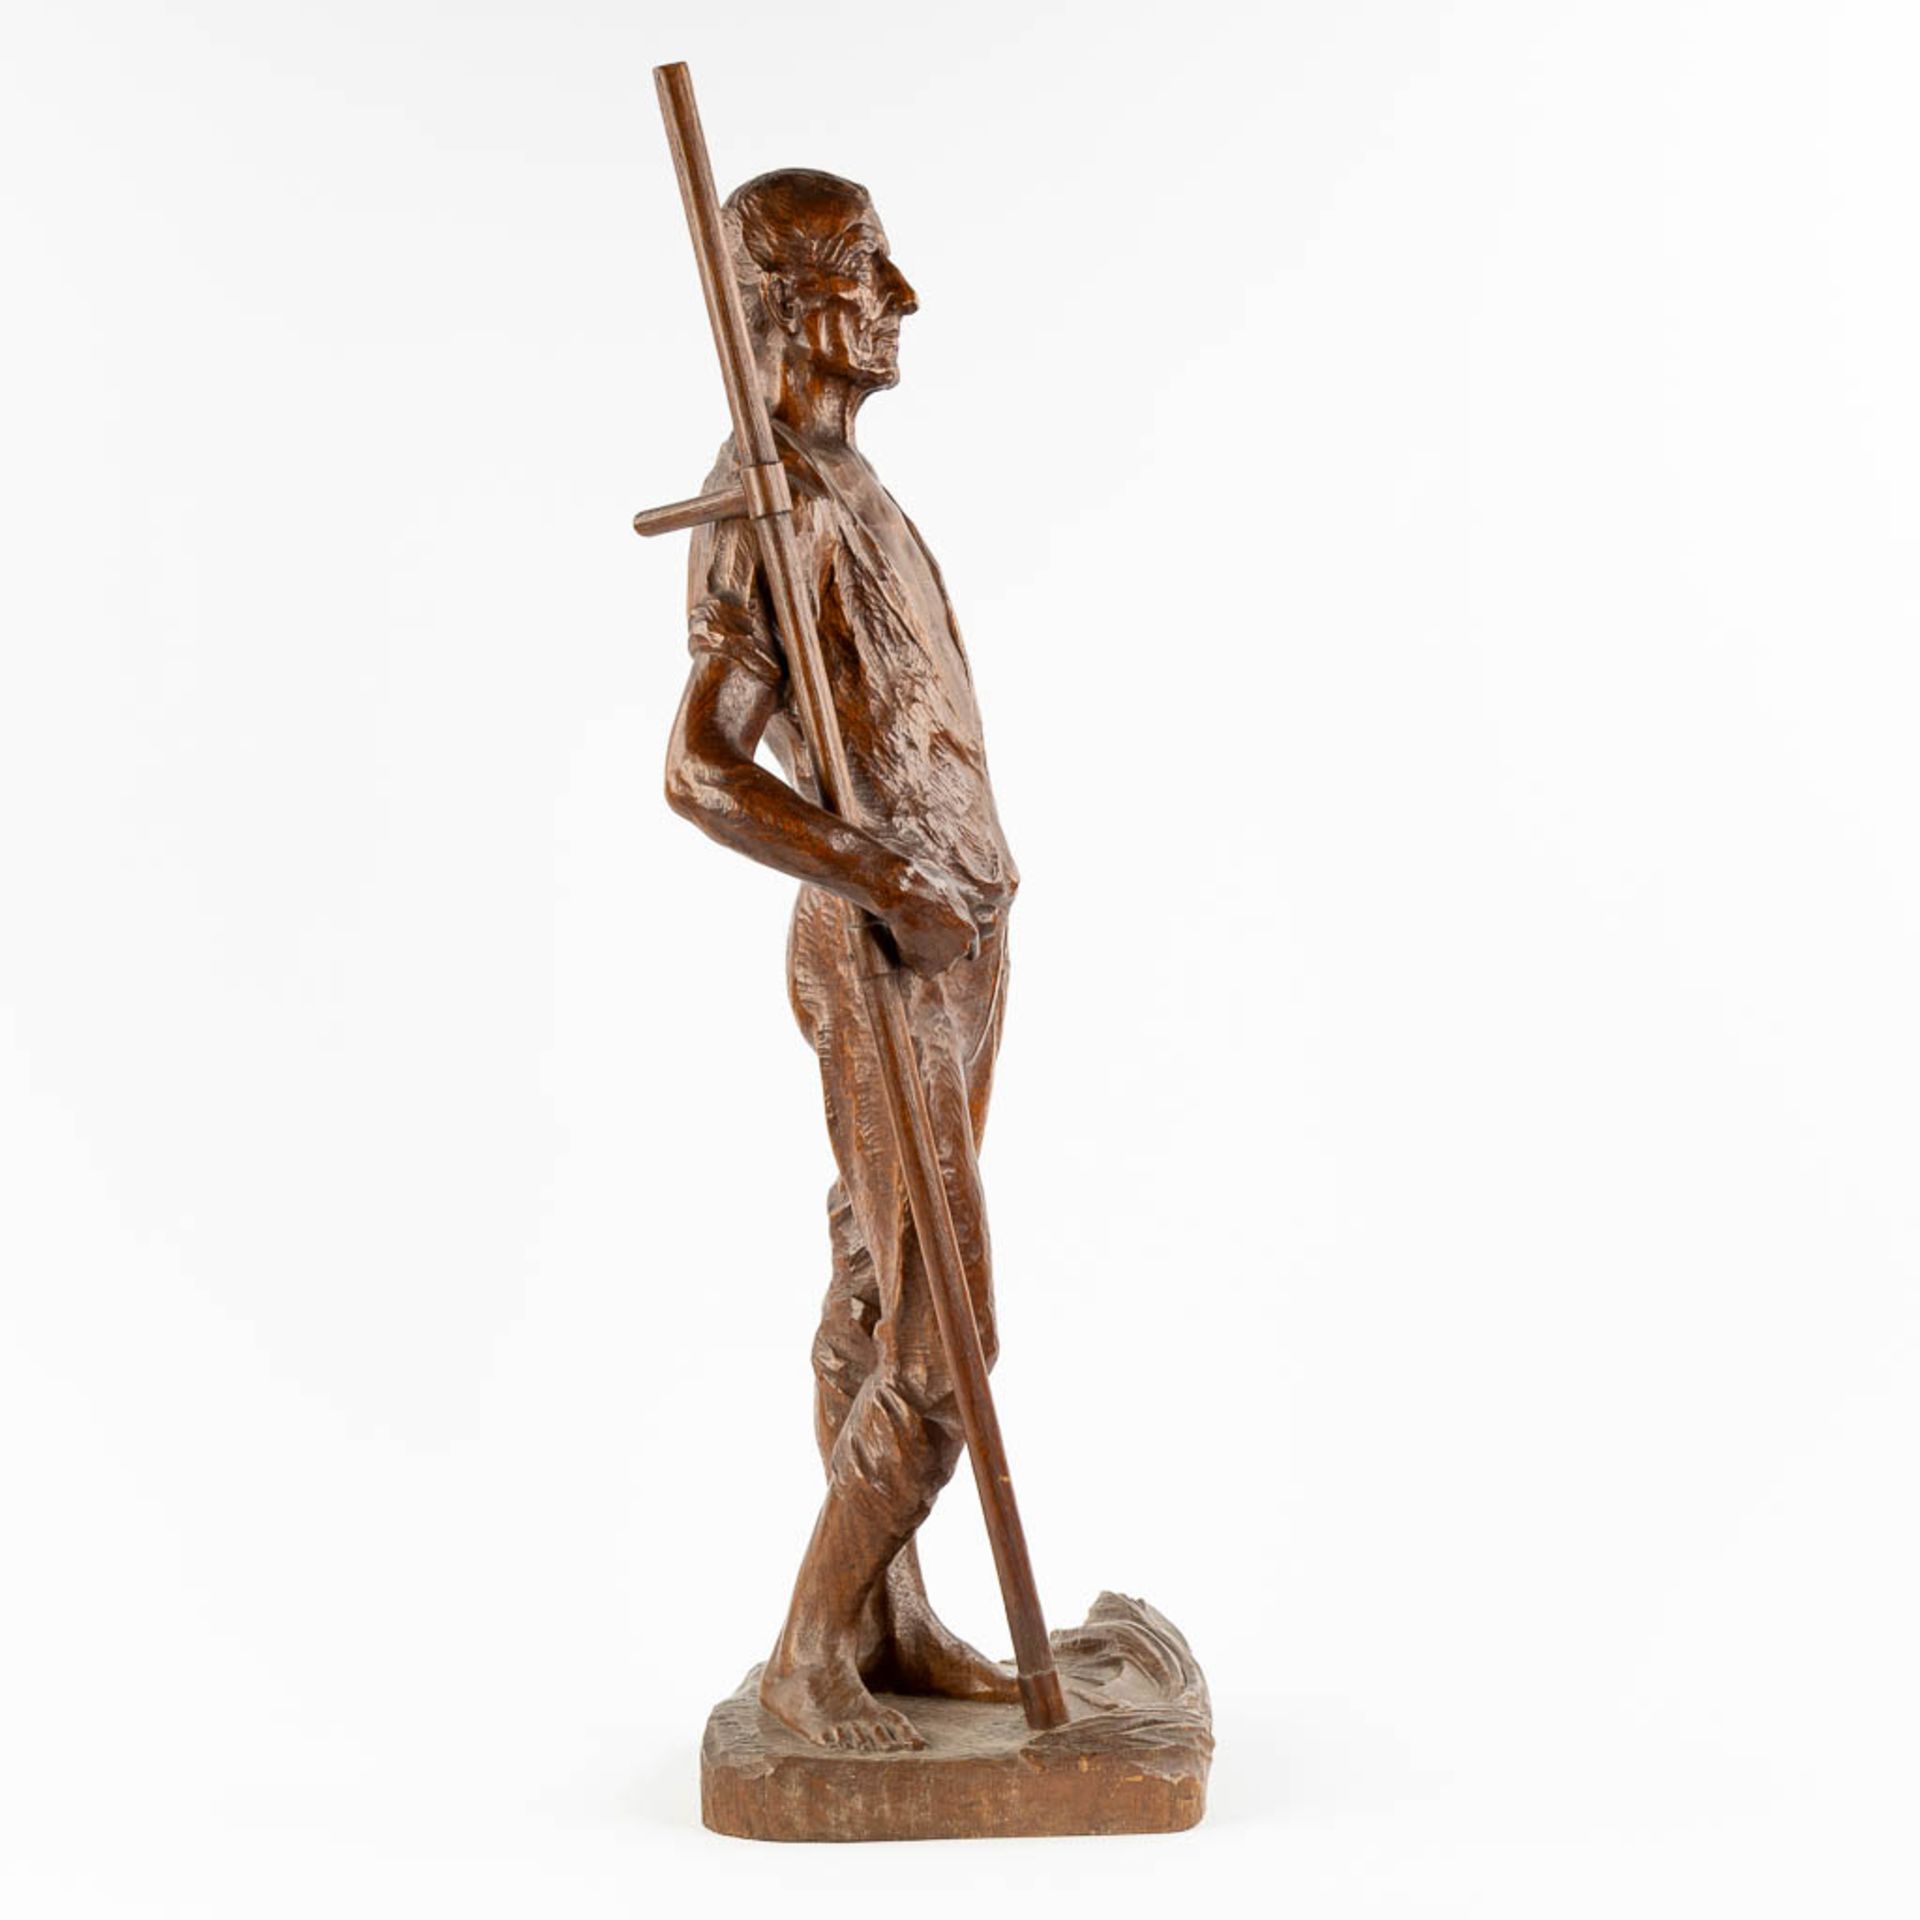 Beaudouin TUERLINCKX (1873-1945) 'Harvester with a scythe' sculptured wood. (L:27 x W:31 x H:90 cm) - Image 4 of 9